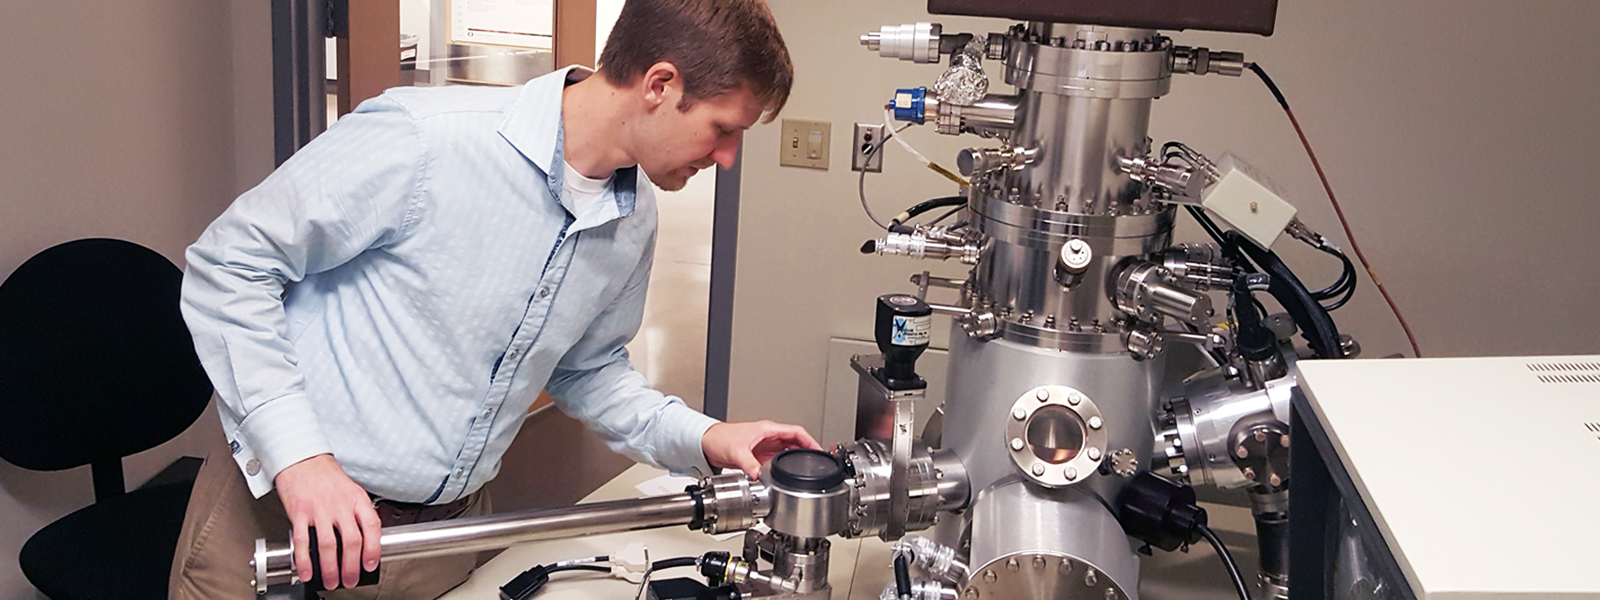 A man makes small adjustments to a machine in the Center for Advanced Materials Characterization in Oregon.